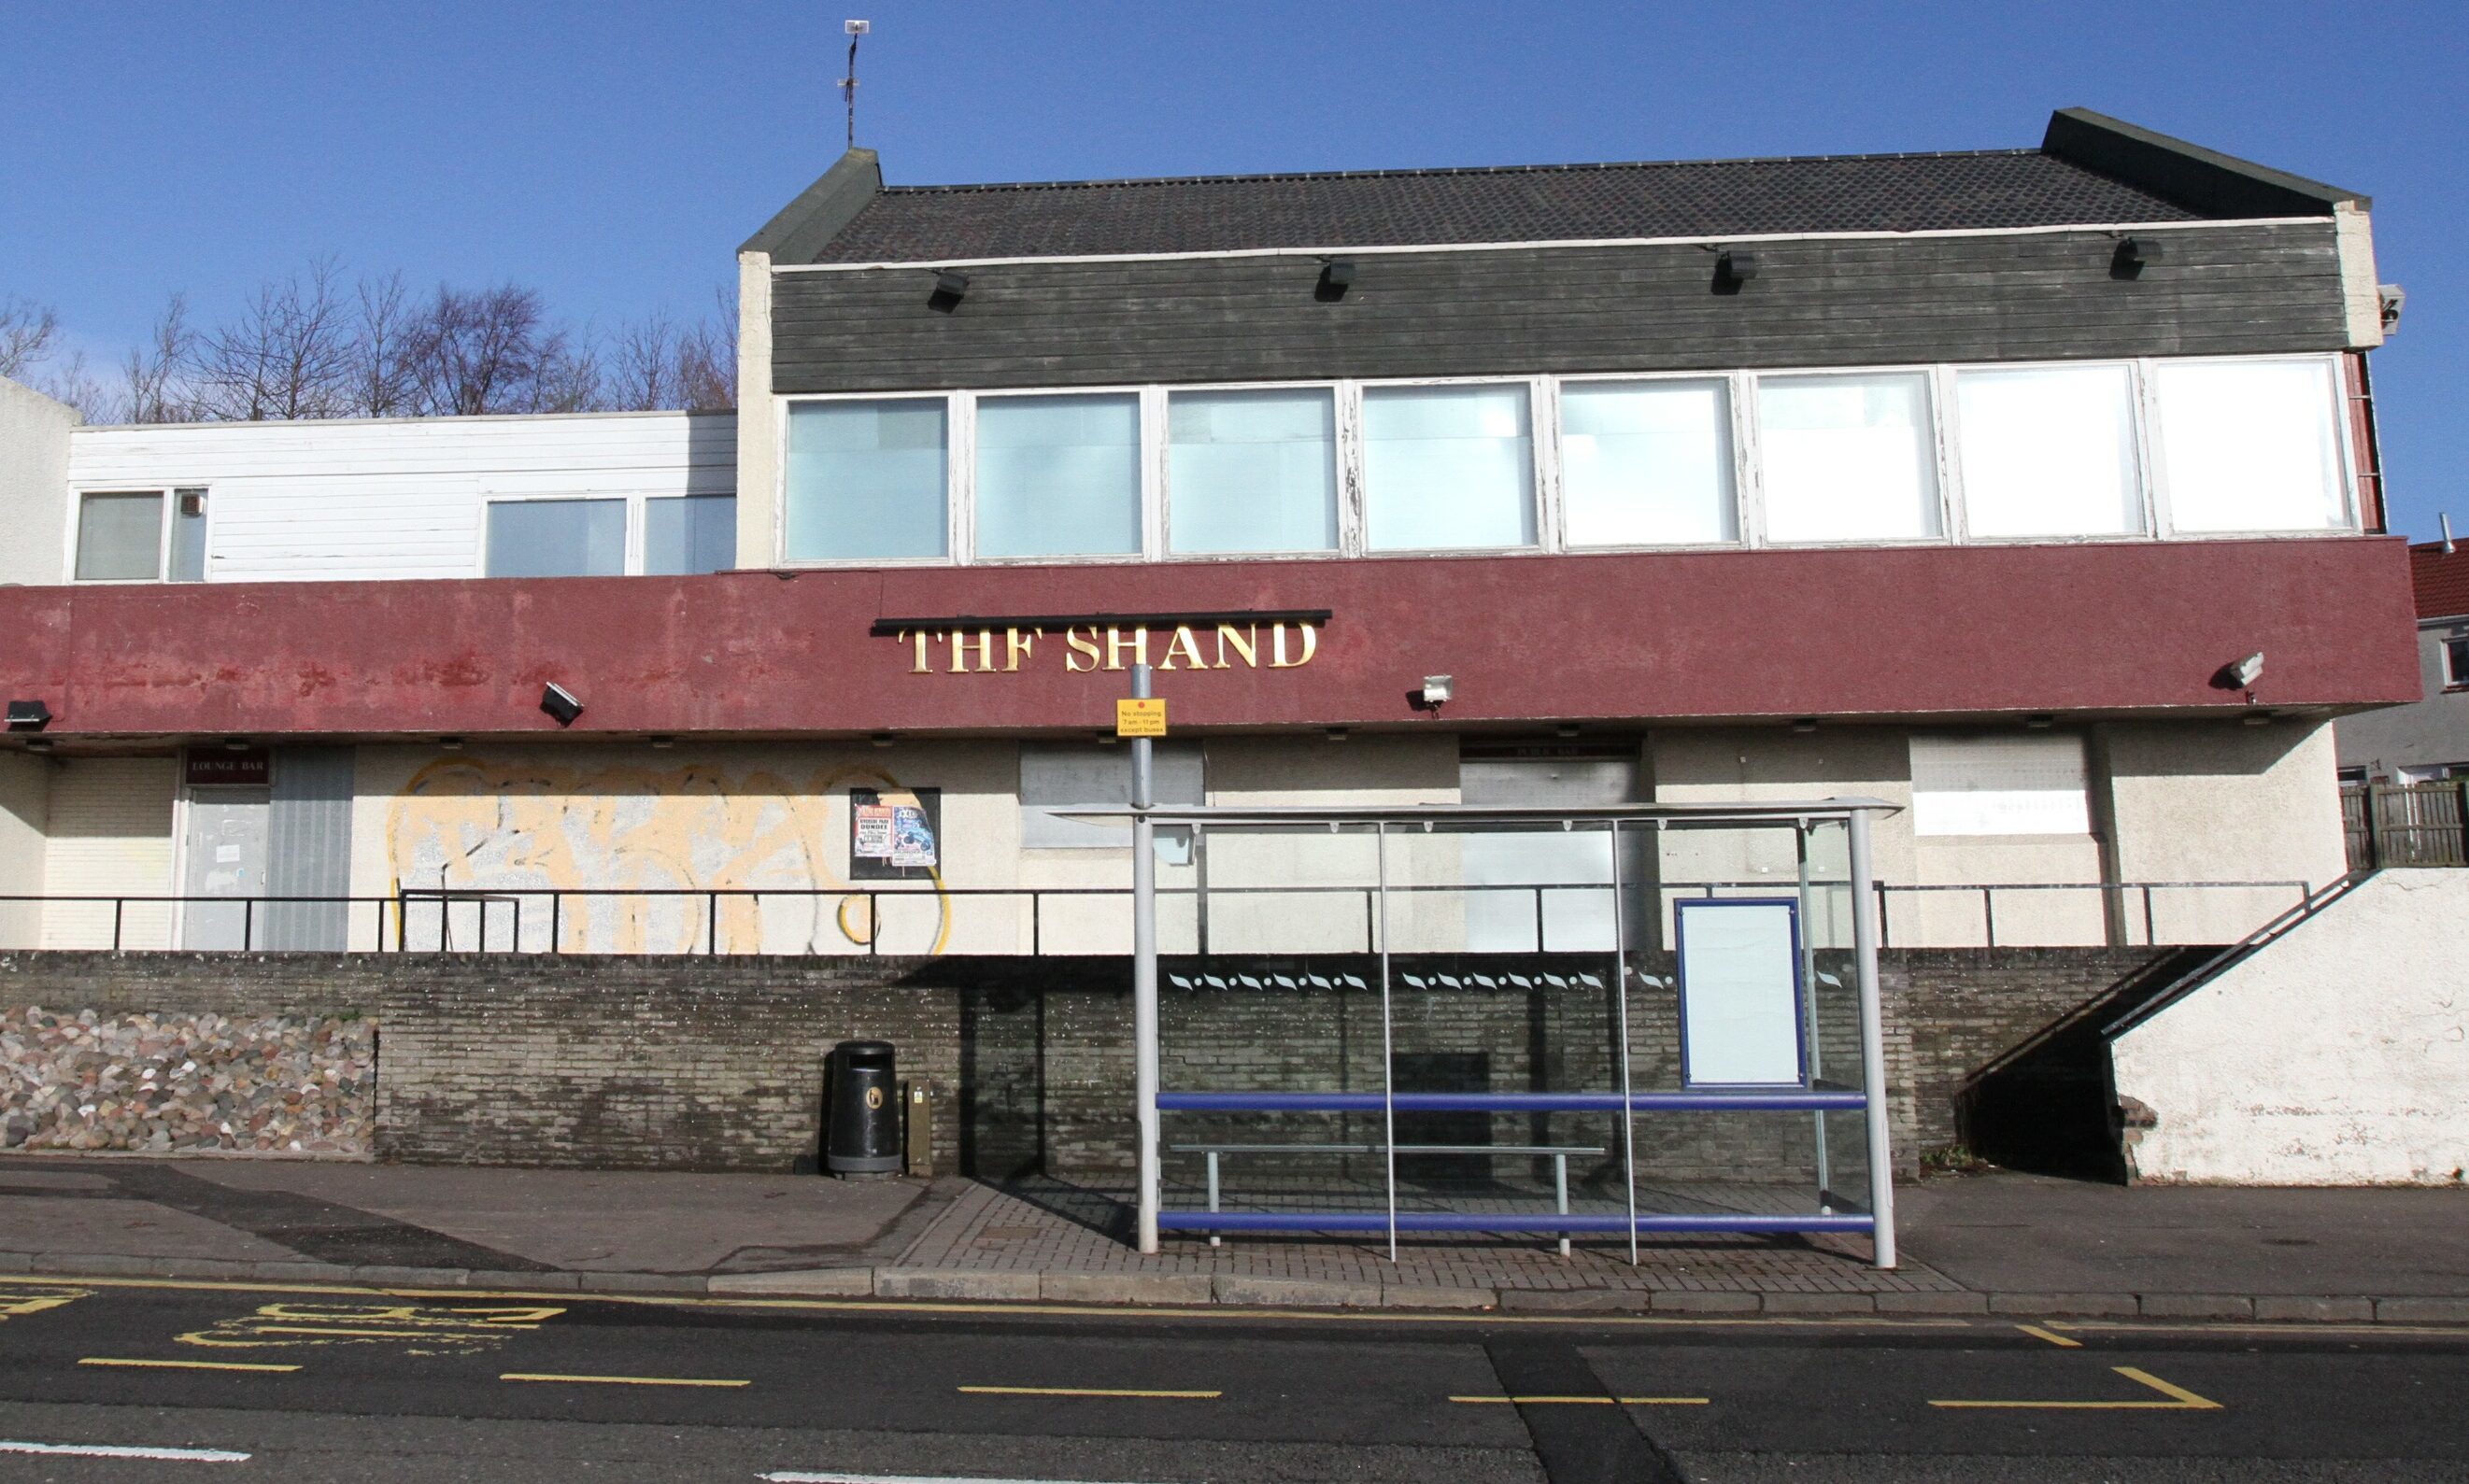 The former Jimmy Shand pub in Menzieshill.